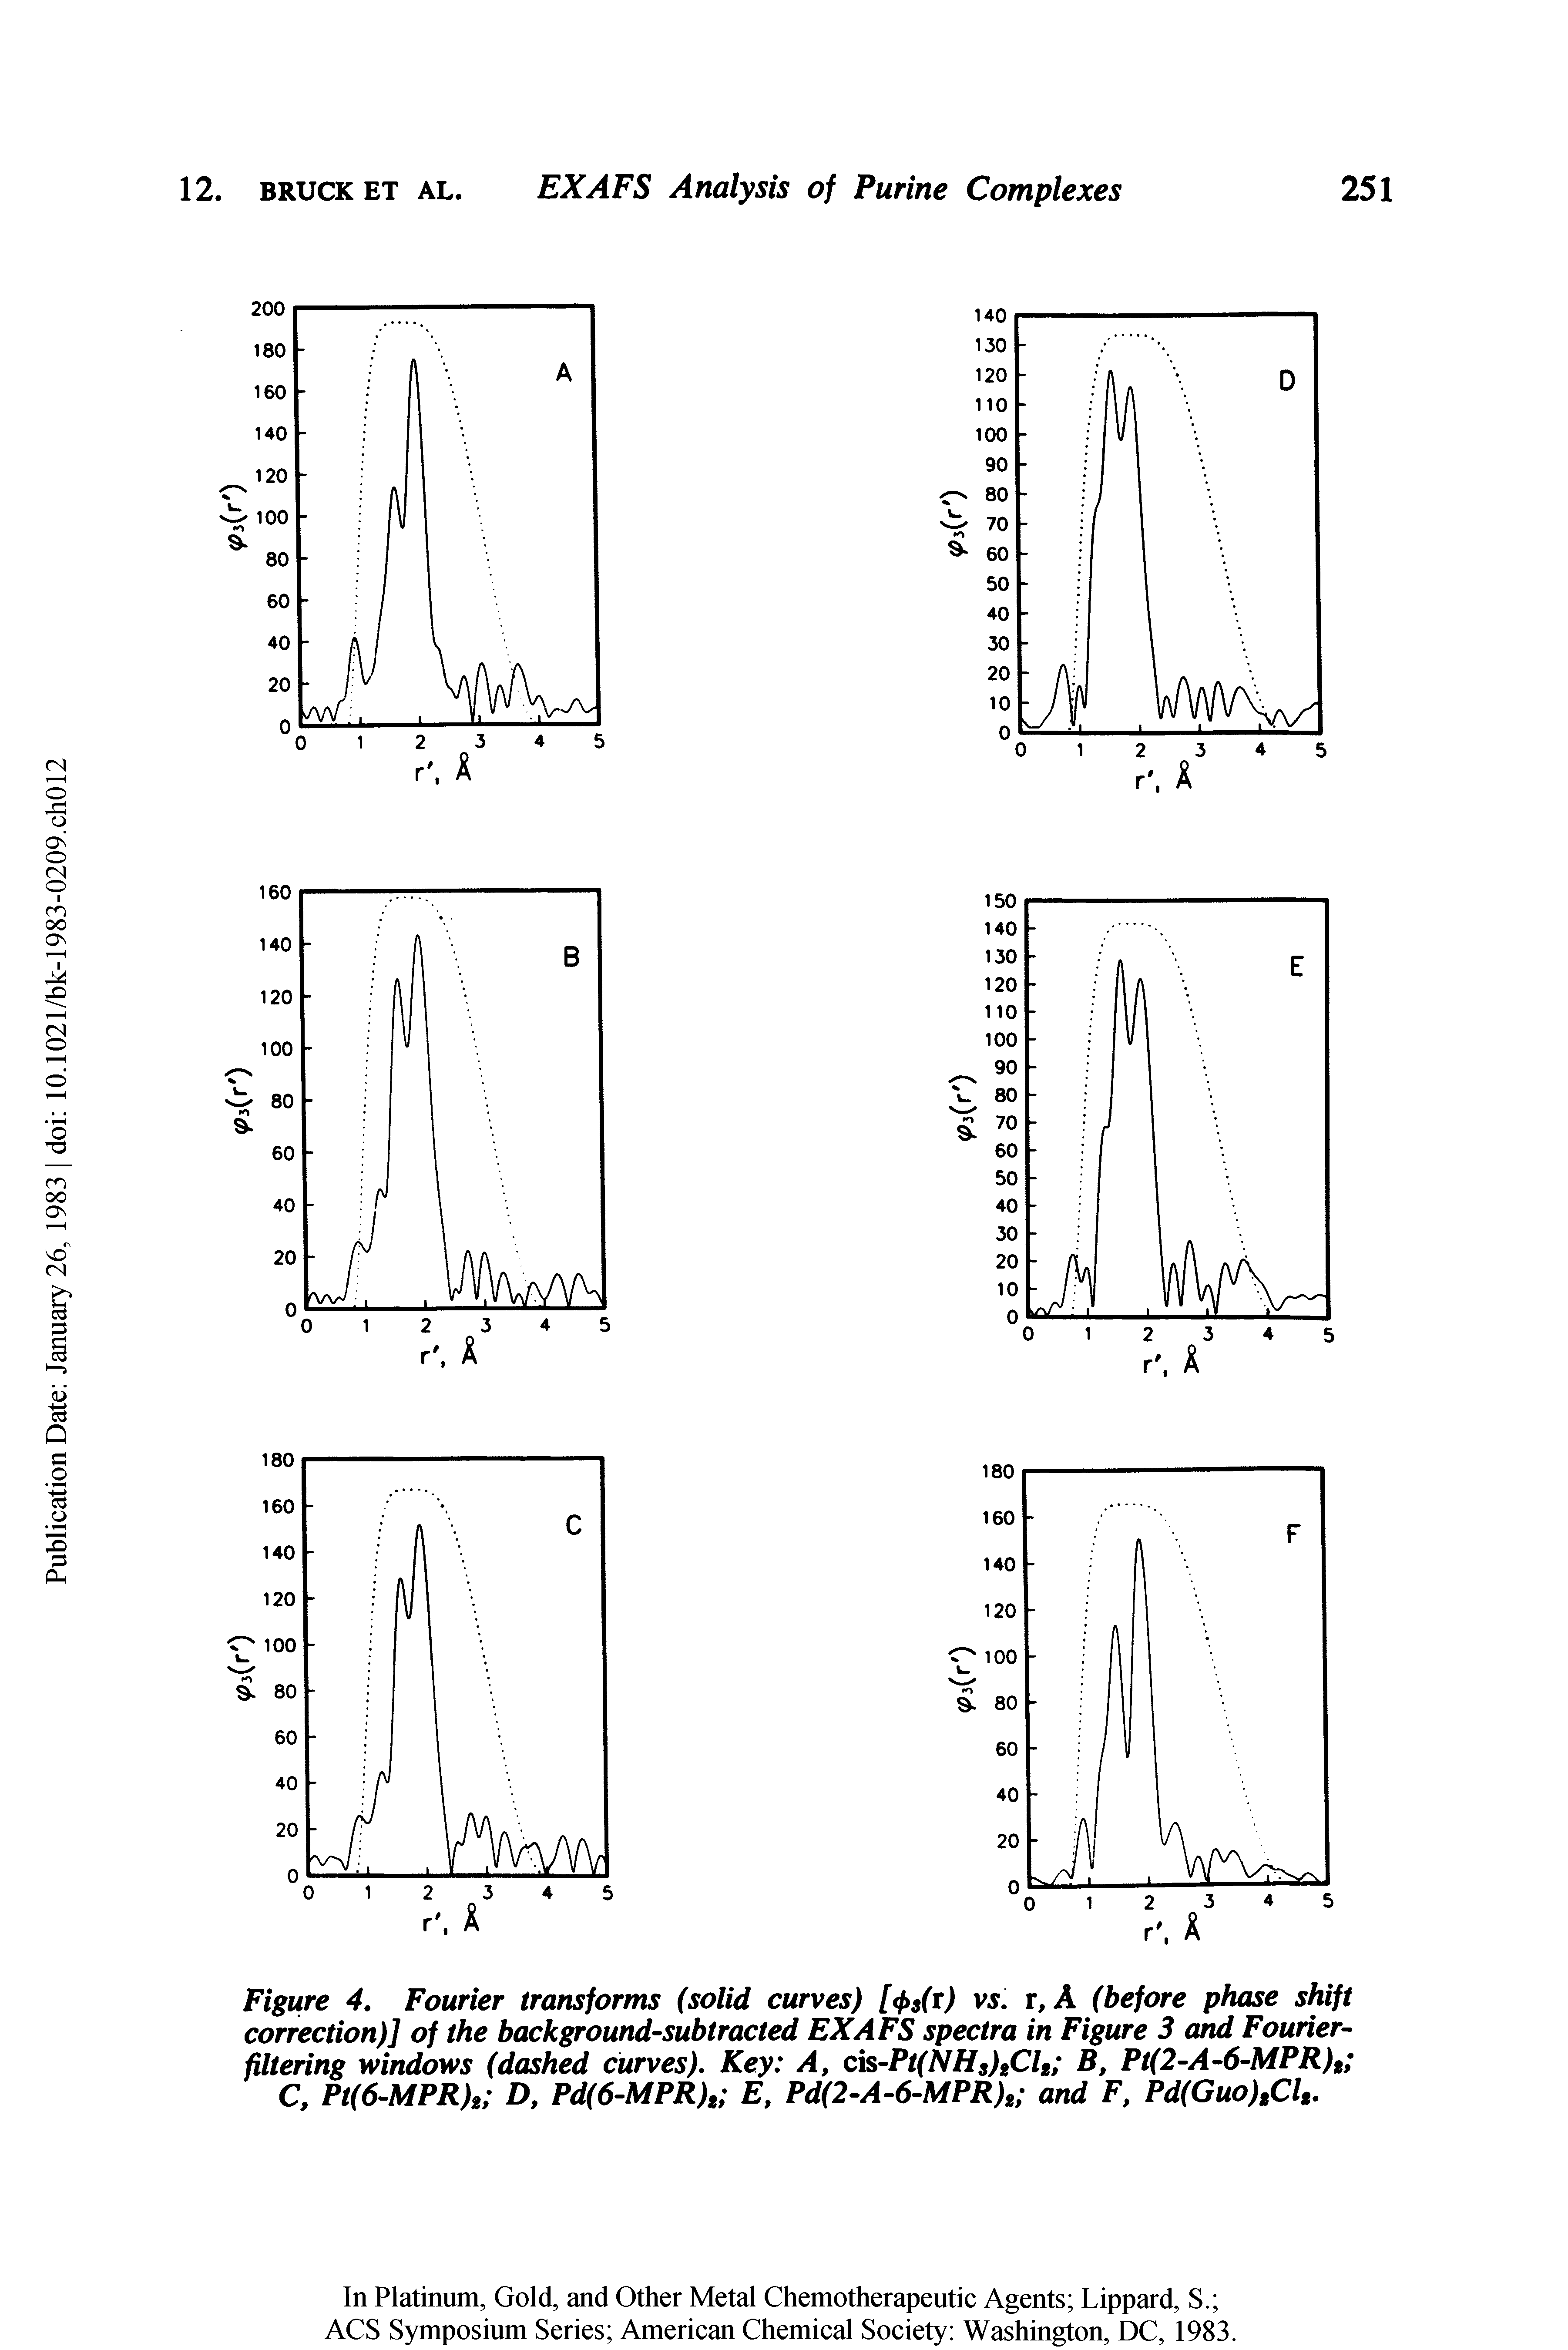 Figure 4. Fourier transforms (solid curves) [<I>s(t) vs. r, A (before phase shift correction)] of the background-subtracted EXAFS spectra in Figure 3 and Fourier-filtering windows (dashed curves). Key A, cis-Pt(NHs) Cl2 B, Pt(2-A-6-MPR)t C, Pt(6-MPR)2 Z>, Pd(6-MPR)2 E, Pd(2-A-6-MPR)2 and F, Pd(Guo)2Cl2.